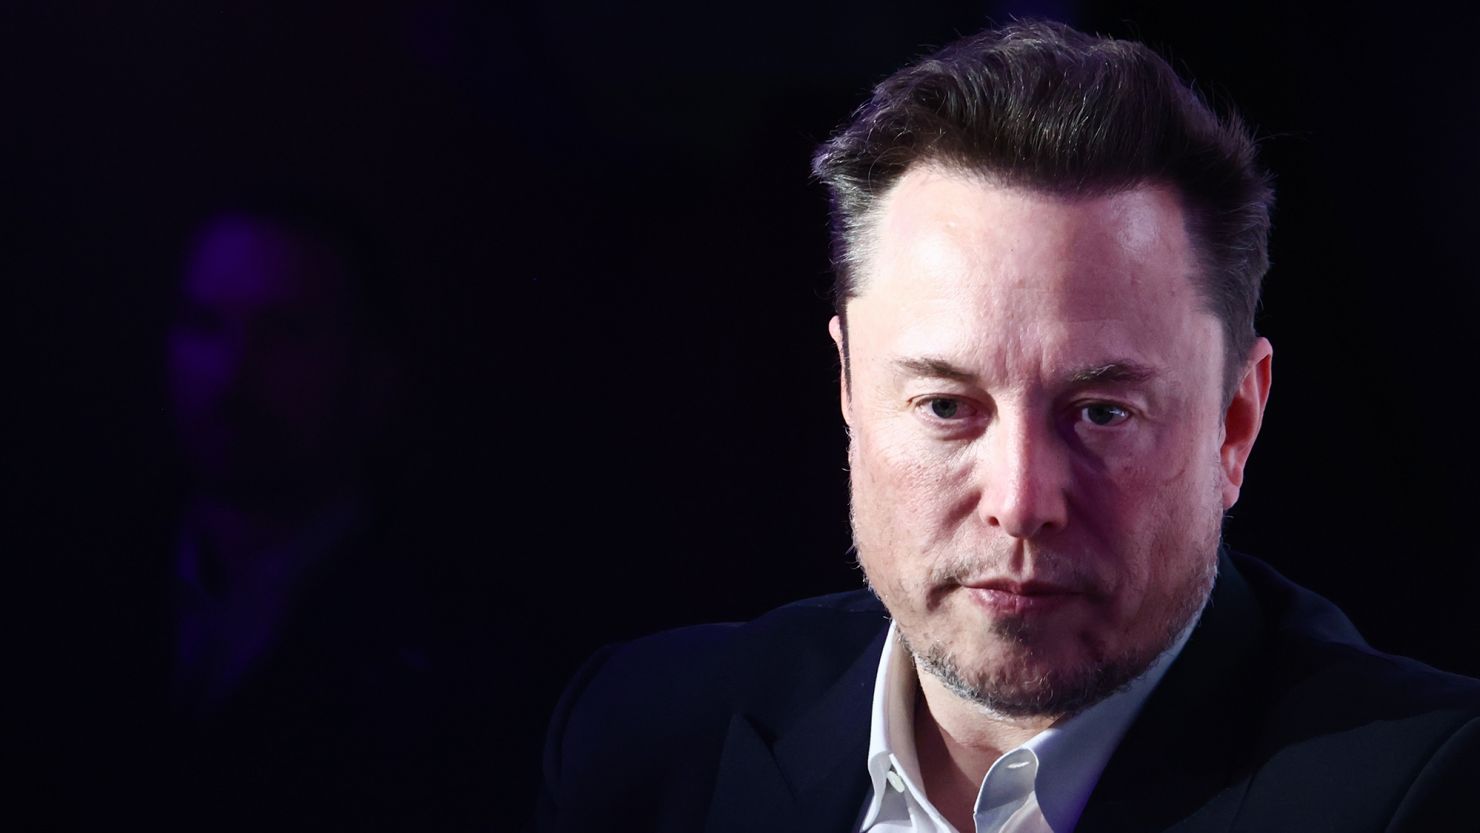 Elon Musk appears Monday at a conference on antisemitism in Krakow, Poland, where he defended his social media platform X, formerly Twitter.